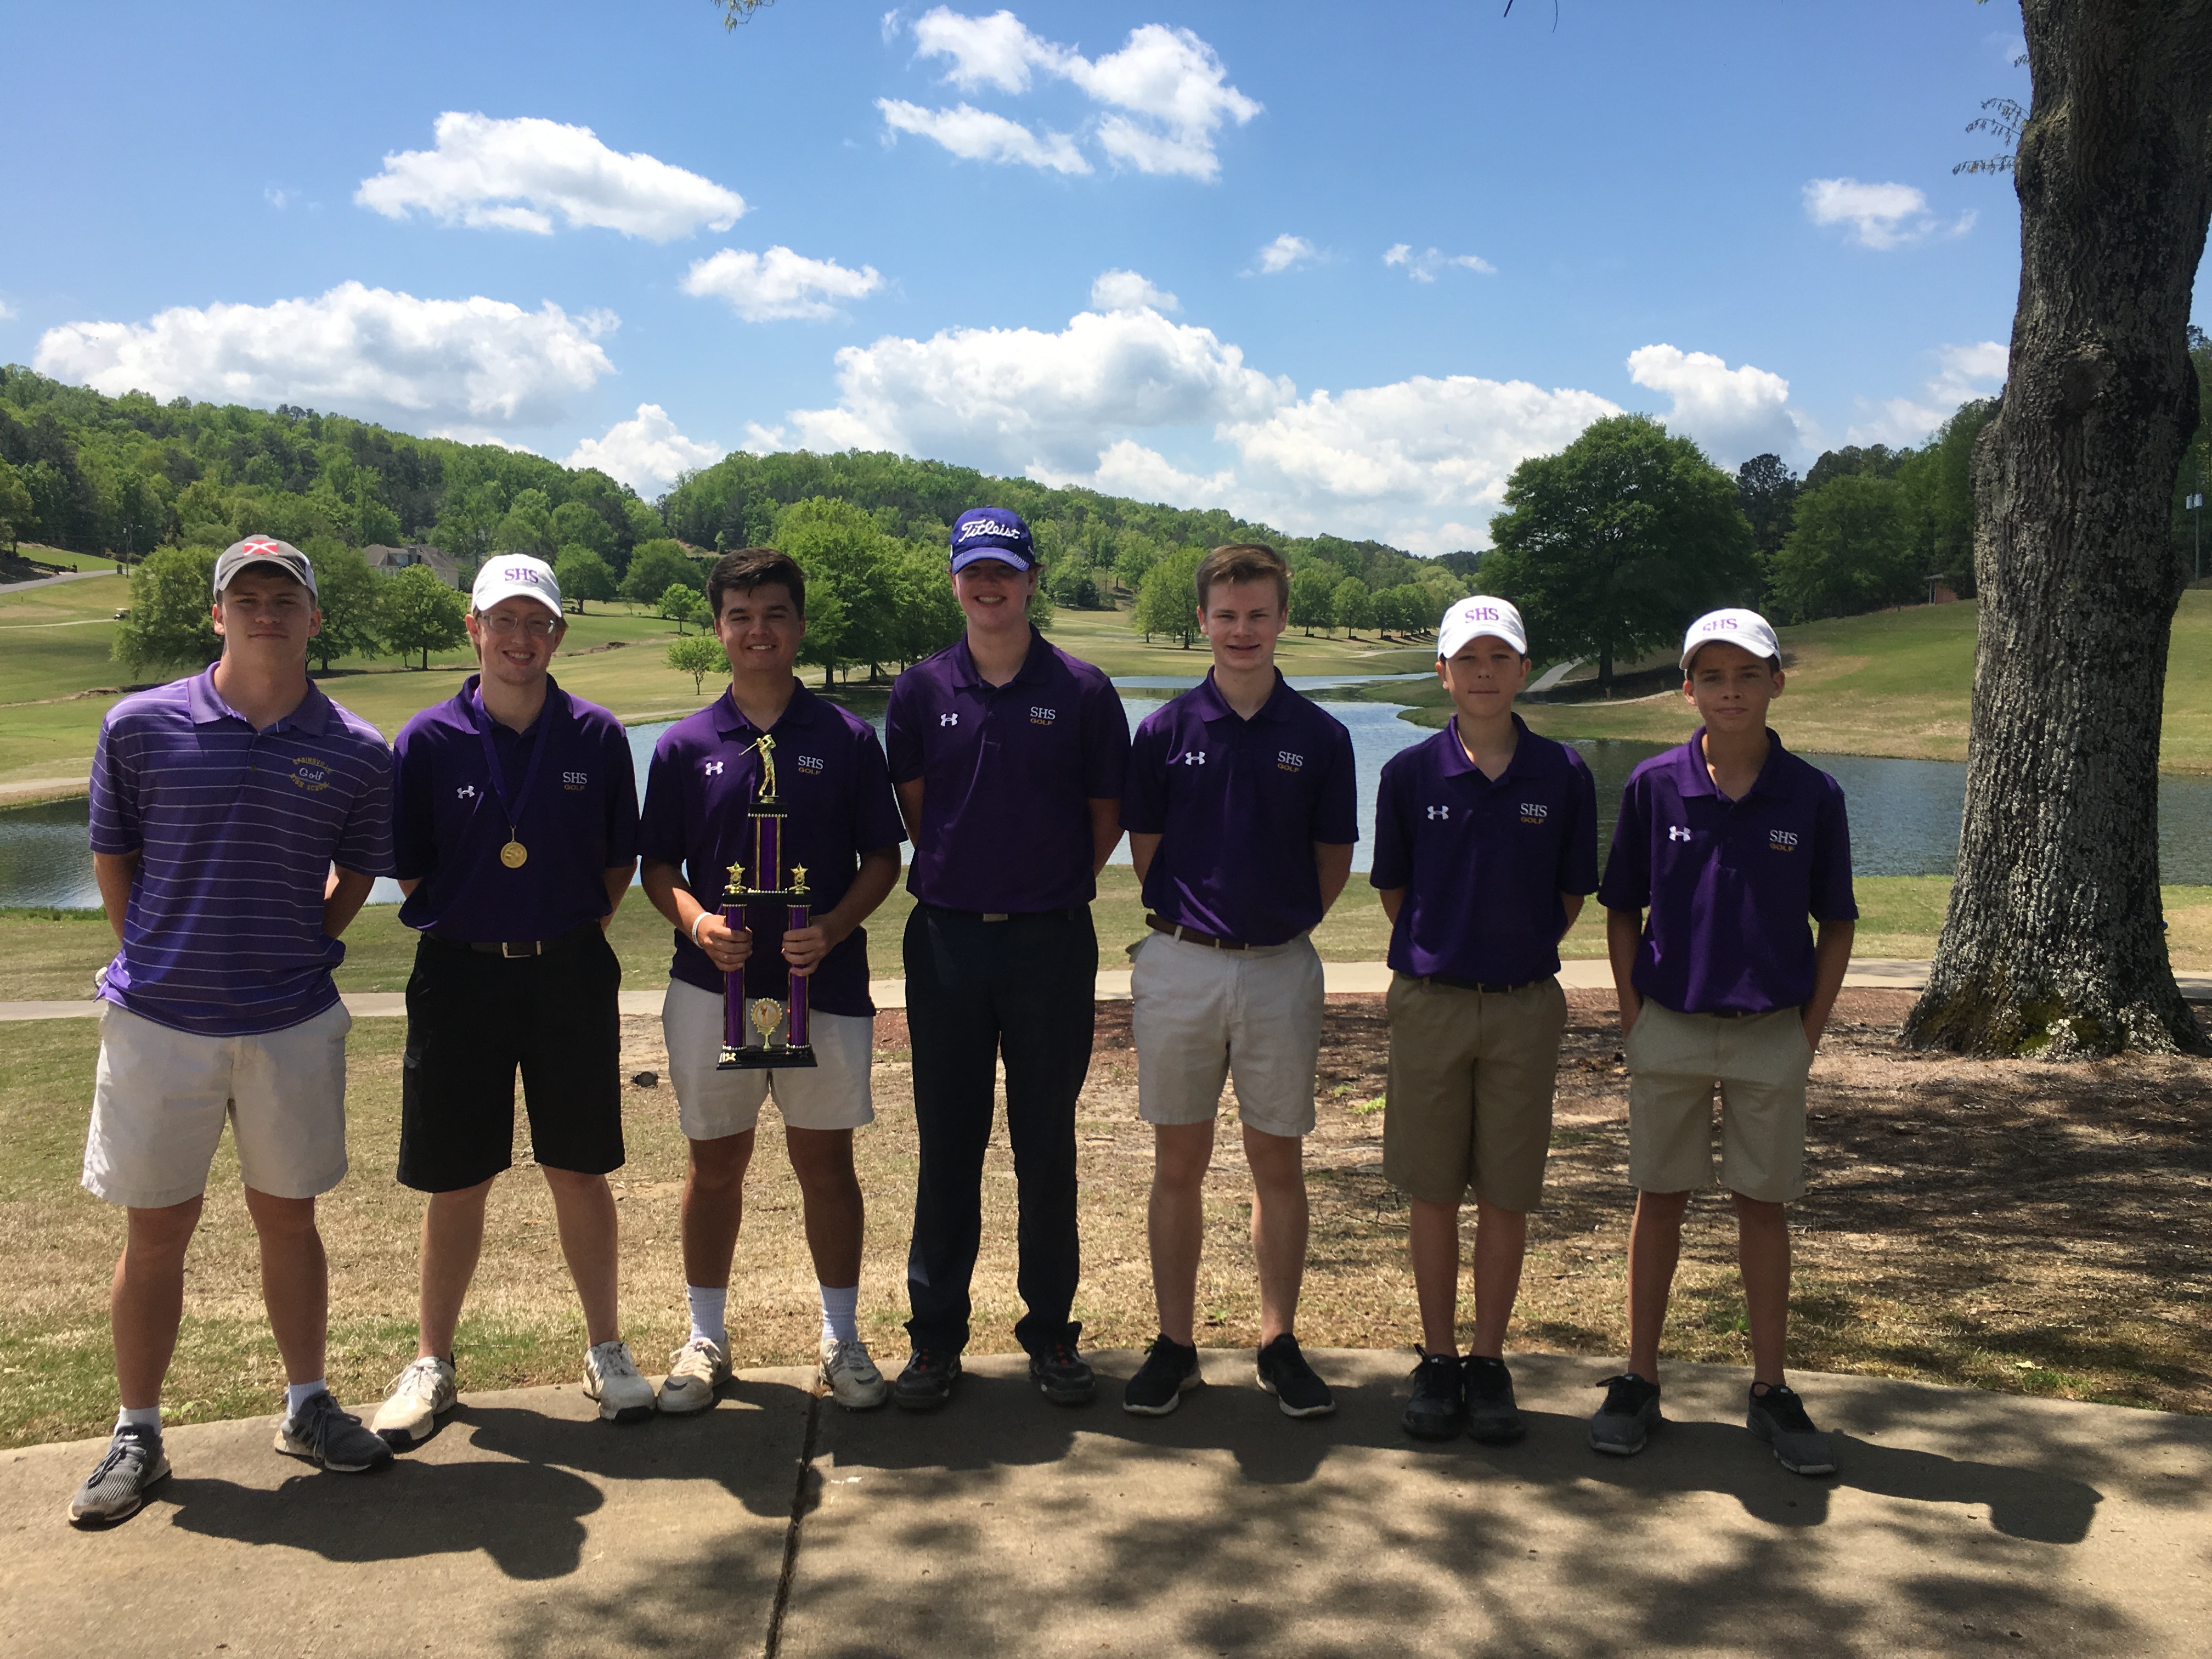 Springville High School takes championship at St. Clair County golf tournament